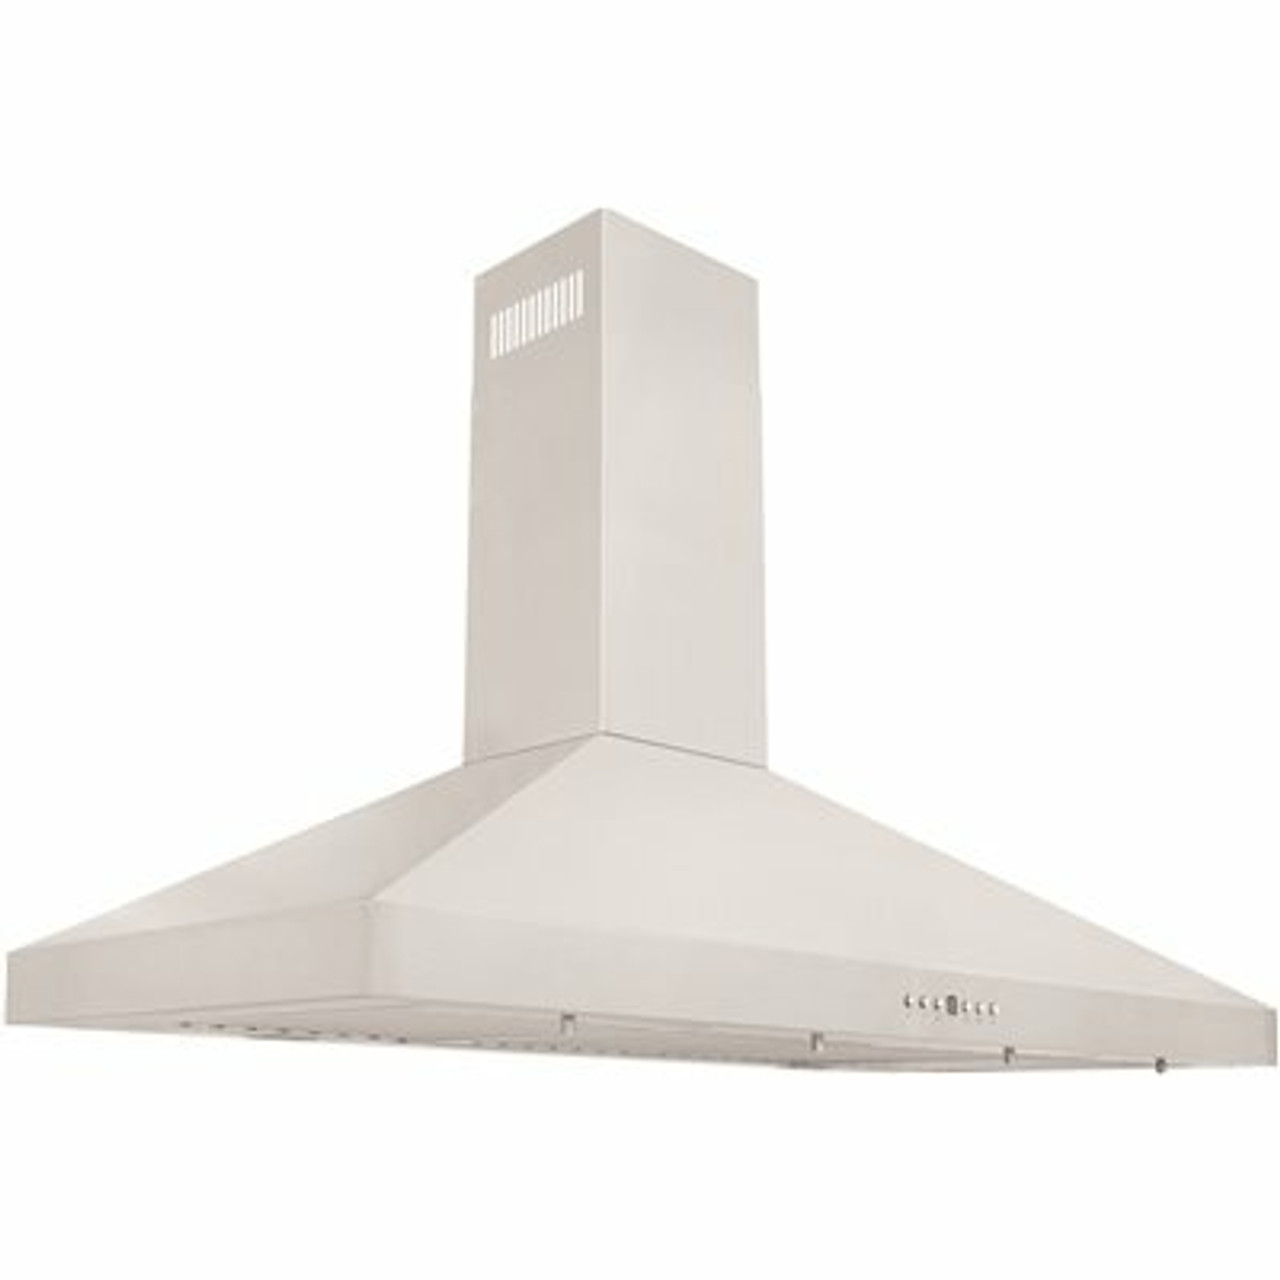 Zline Kitchen And Bath 48 In. Convertible Vent Wall Mount Range Hood In Stainless Steel (Kl3-48)